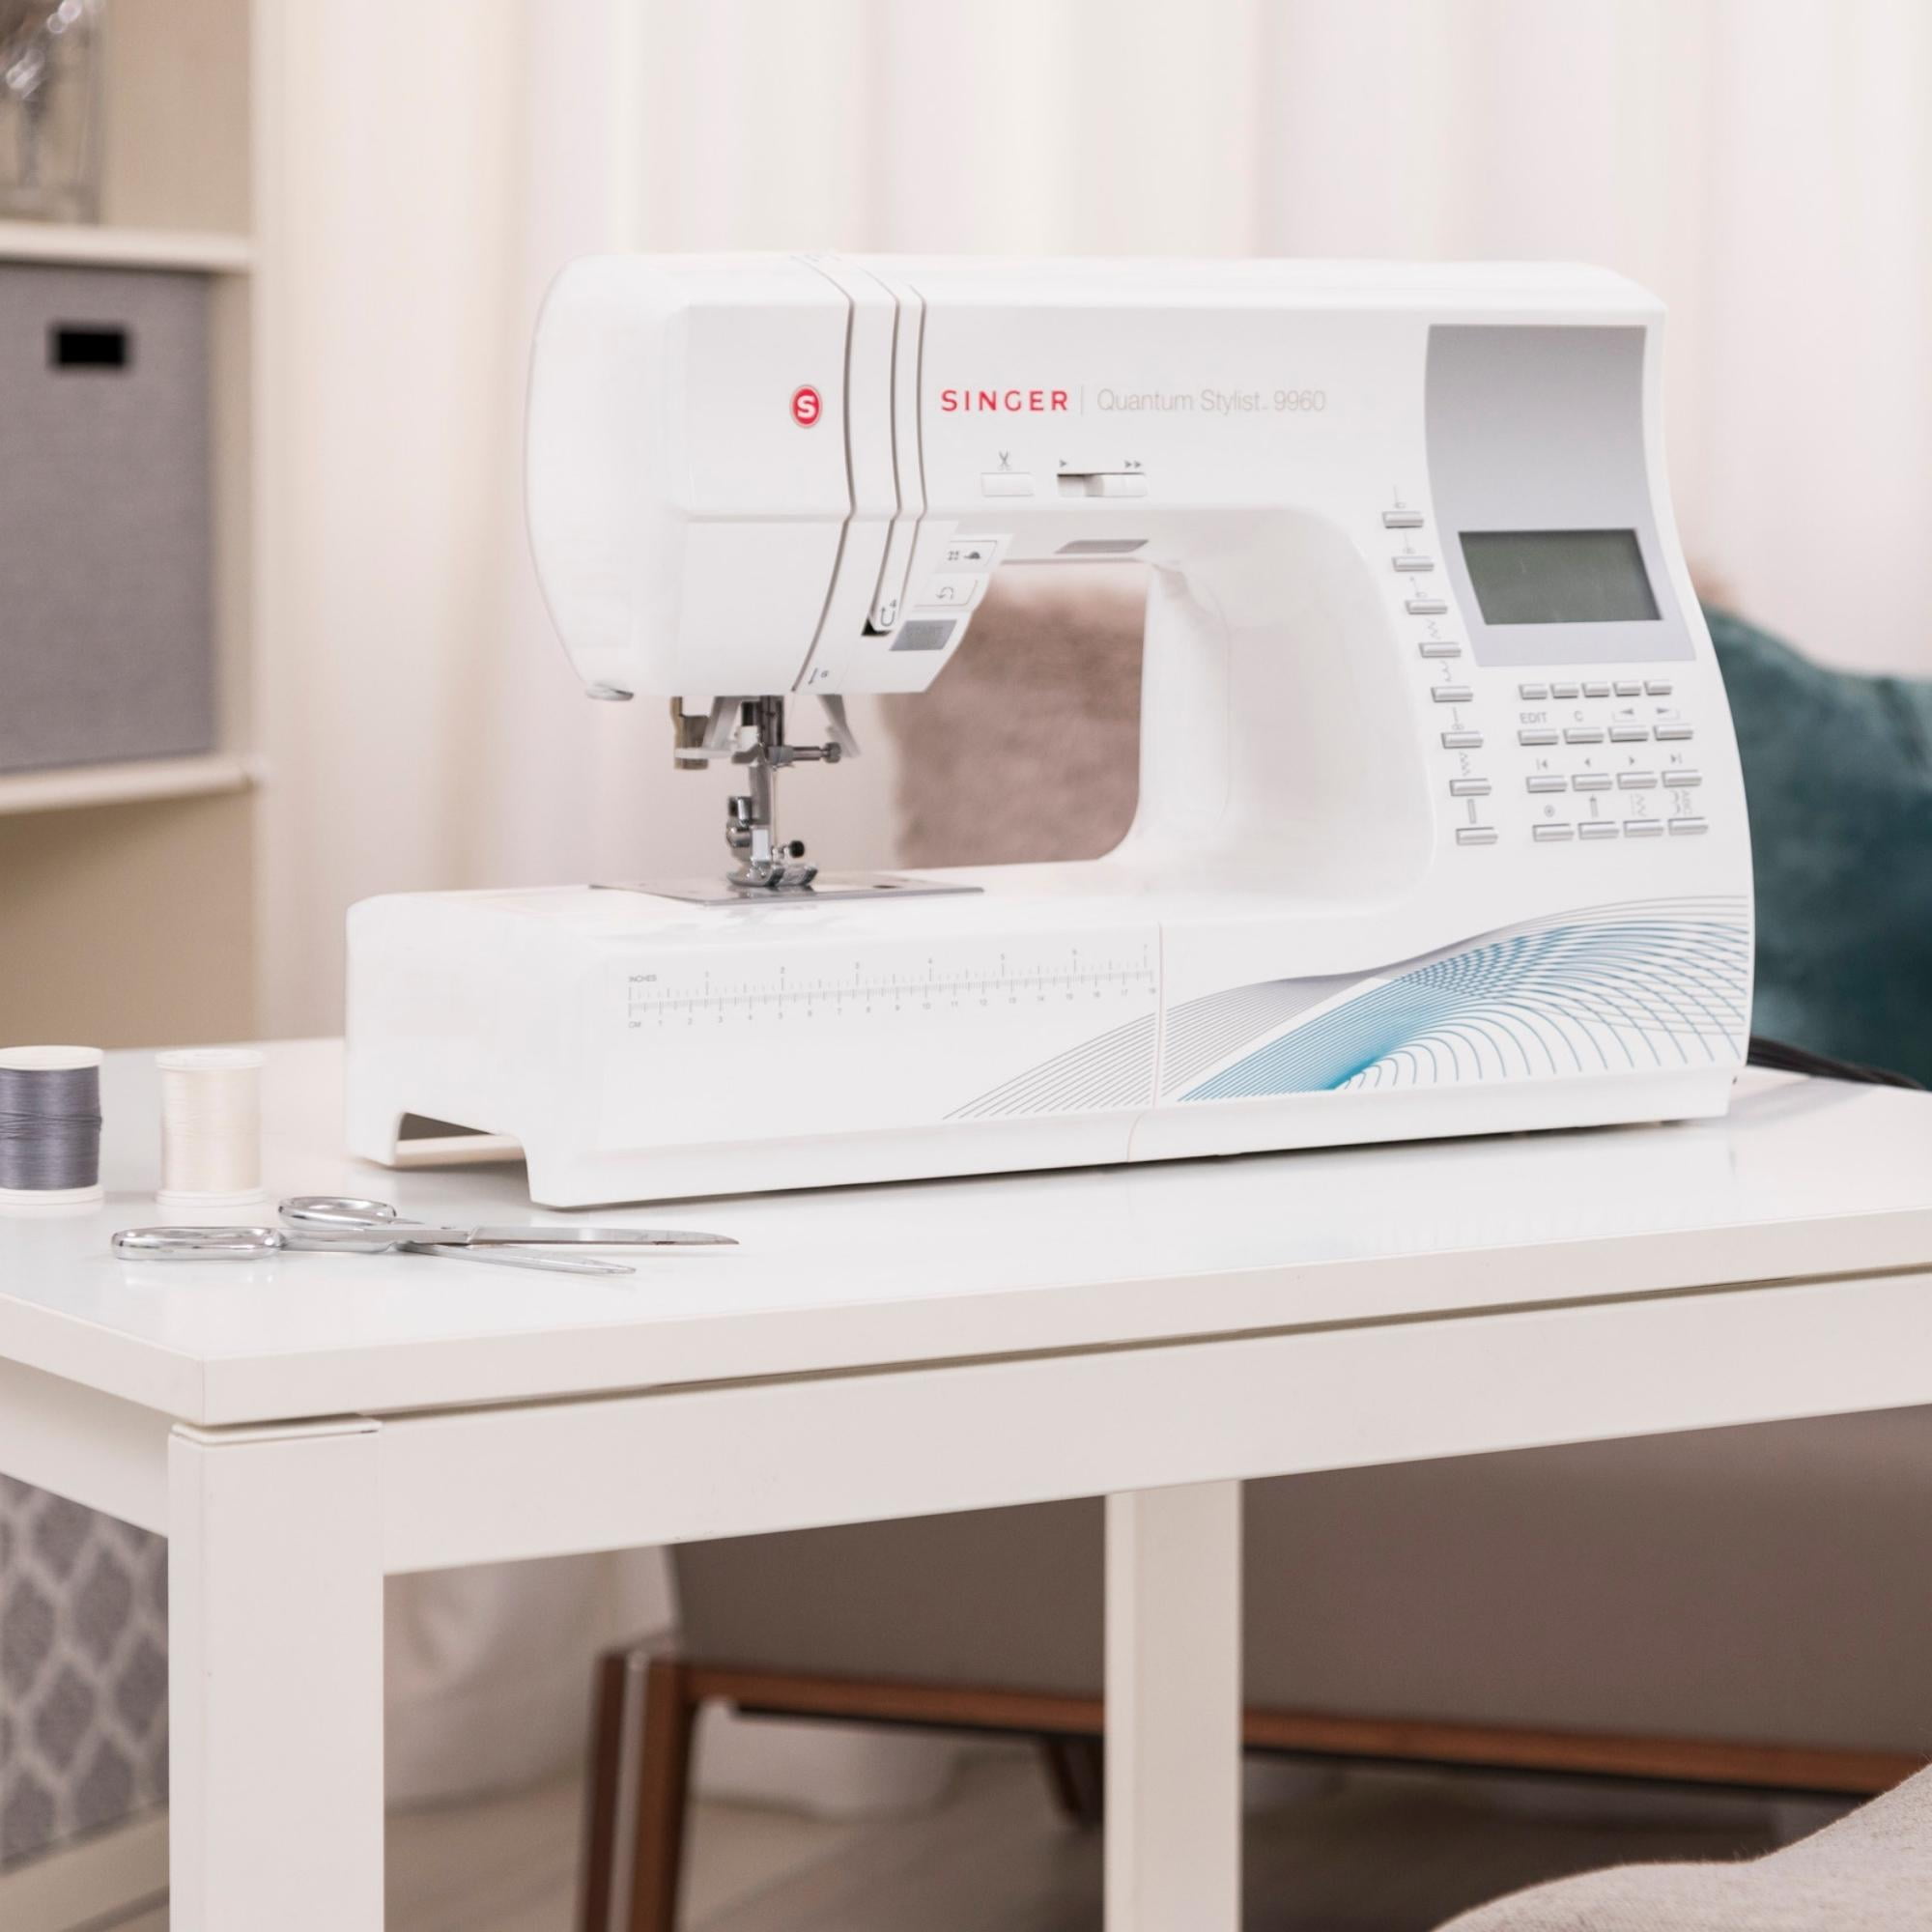 Singer Quantum Stylist 9960 Sewing Machine review by sewingsilly